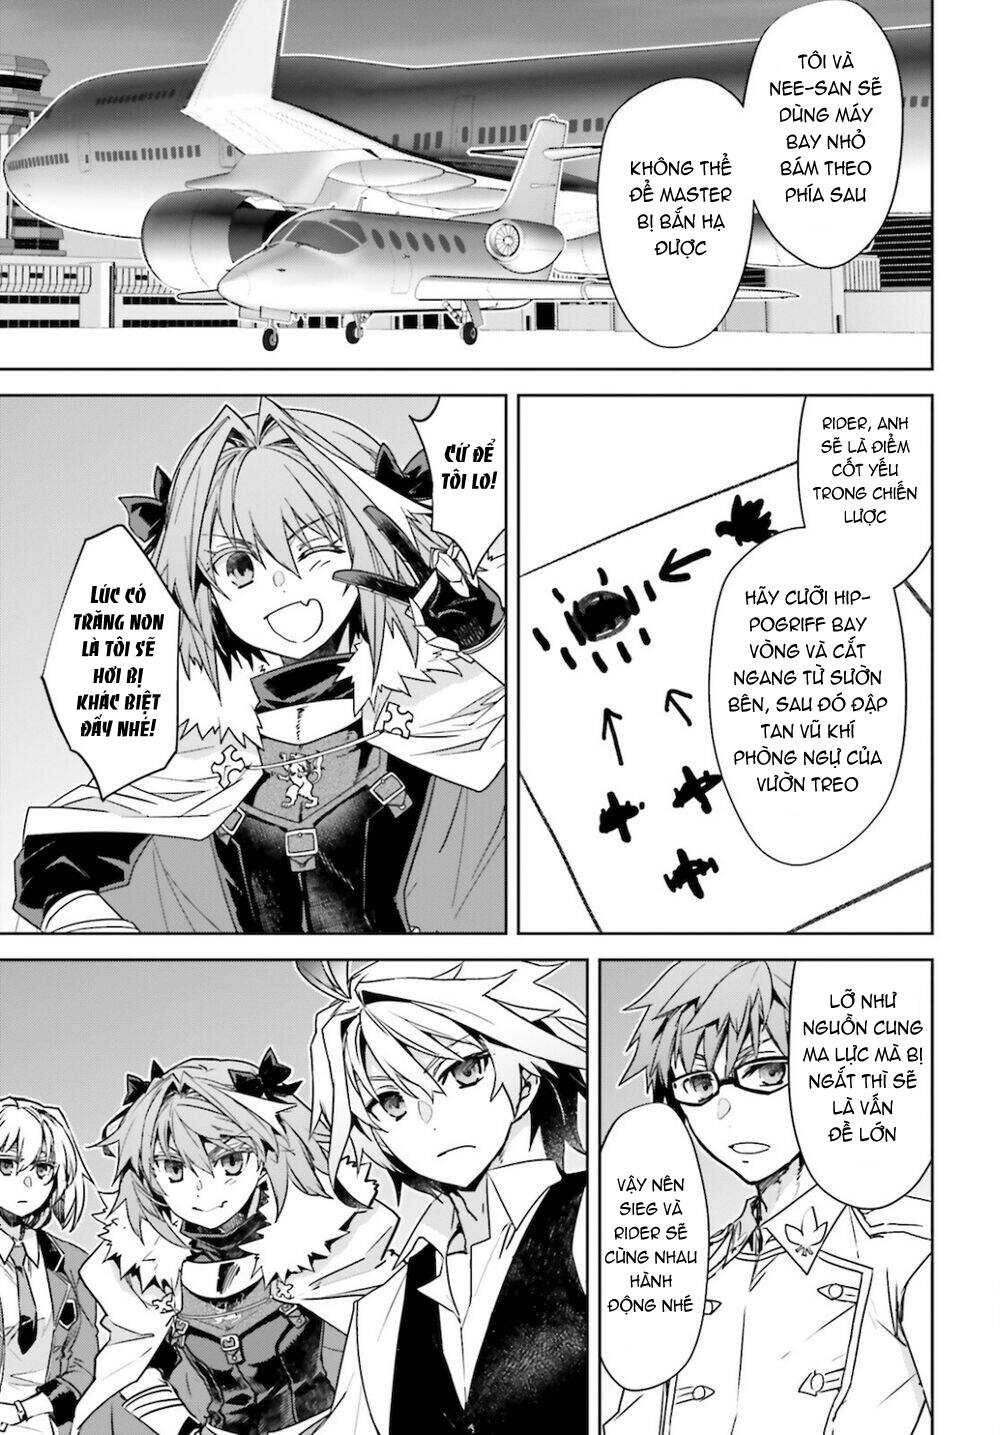 Fate/Apocrypha: Chapter 53: Xuất kích